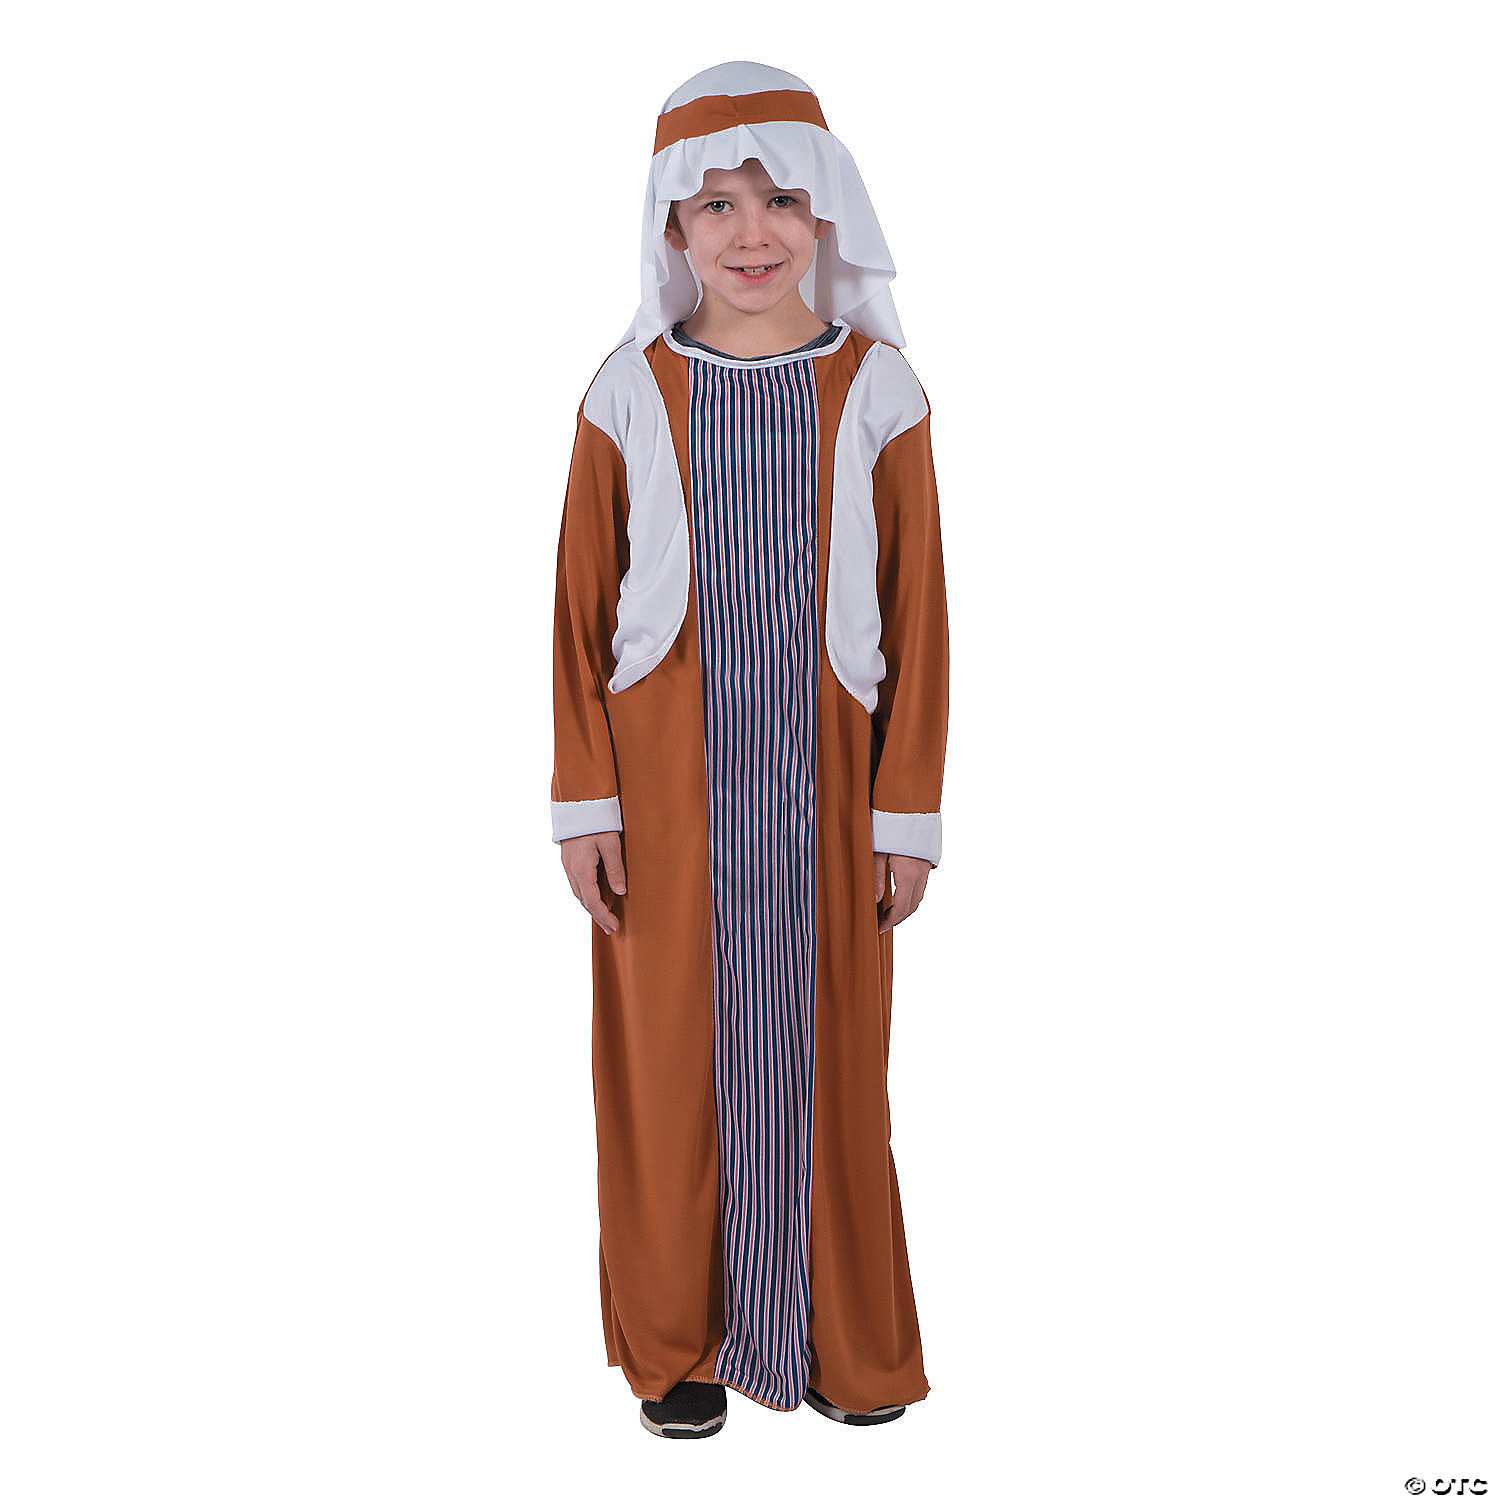 innkeeper outfits nativity